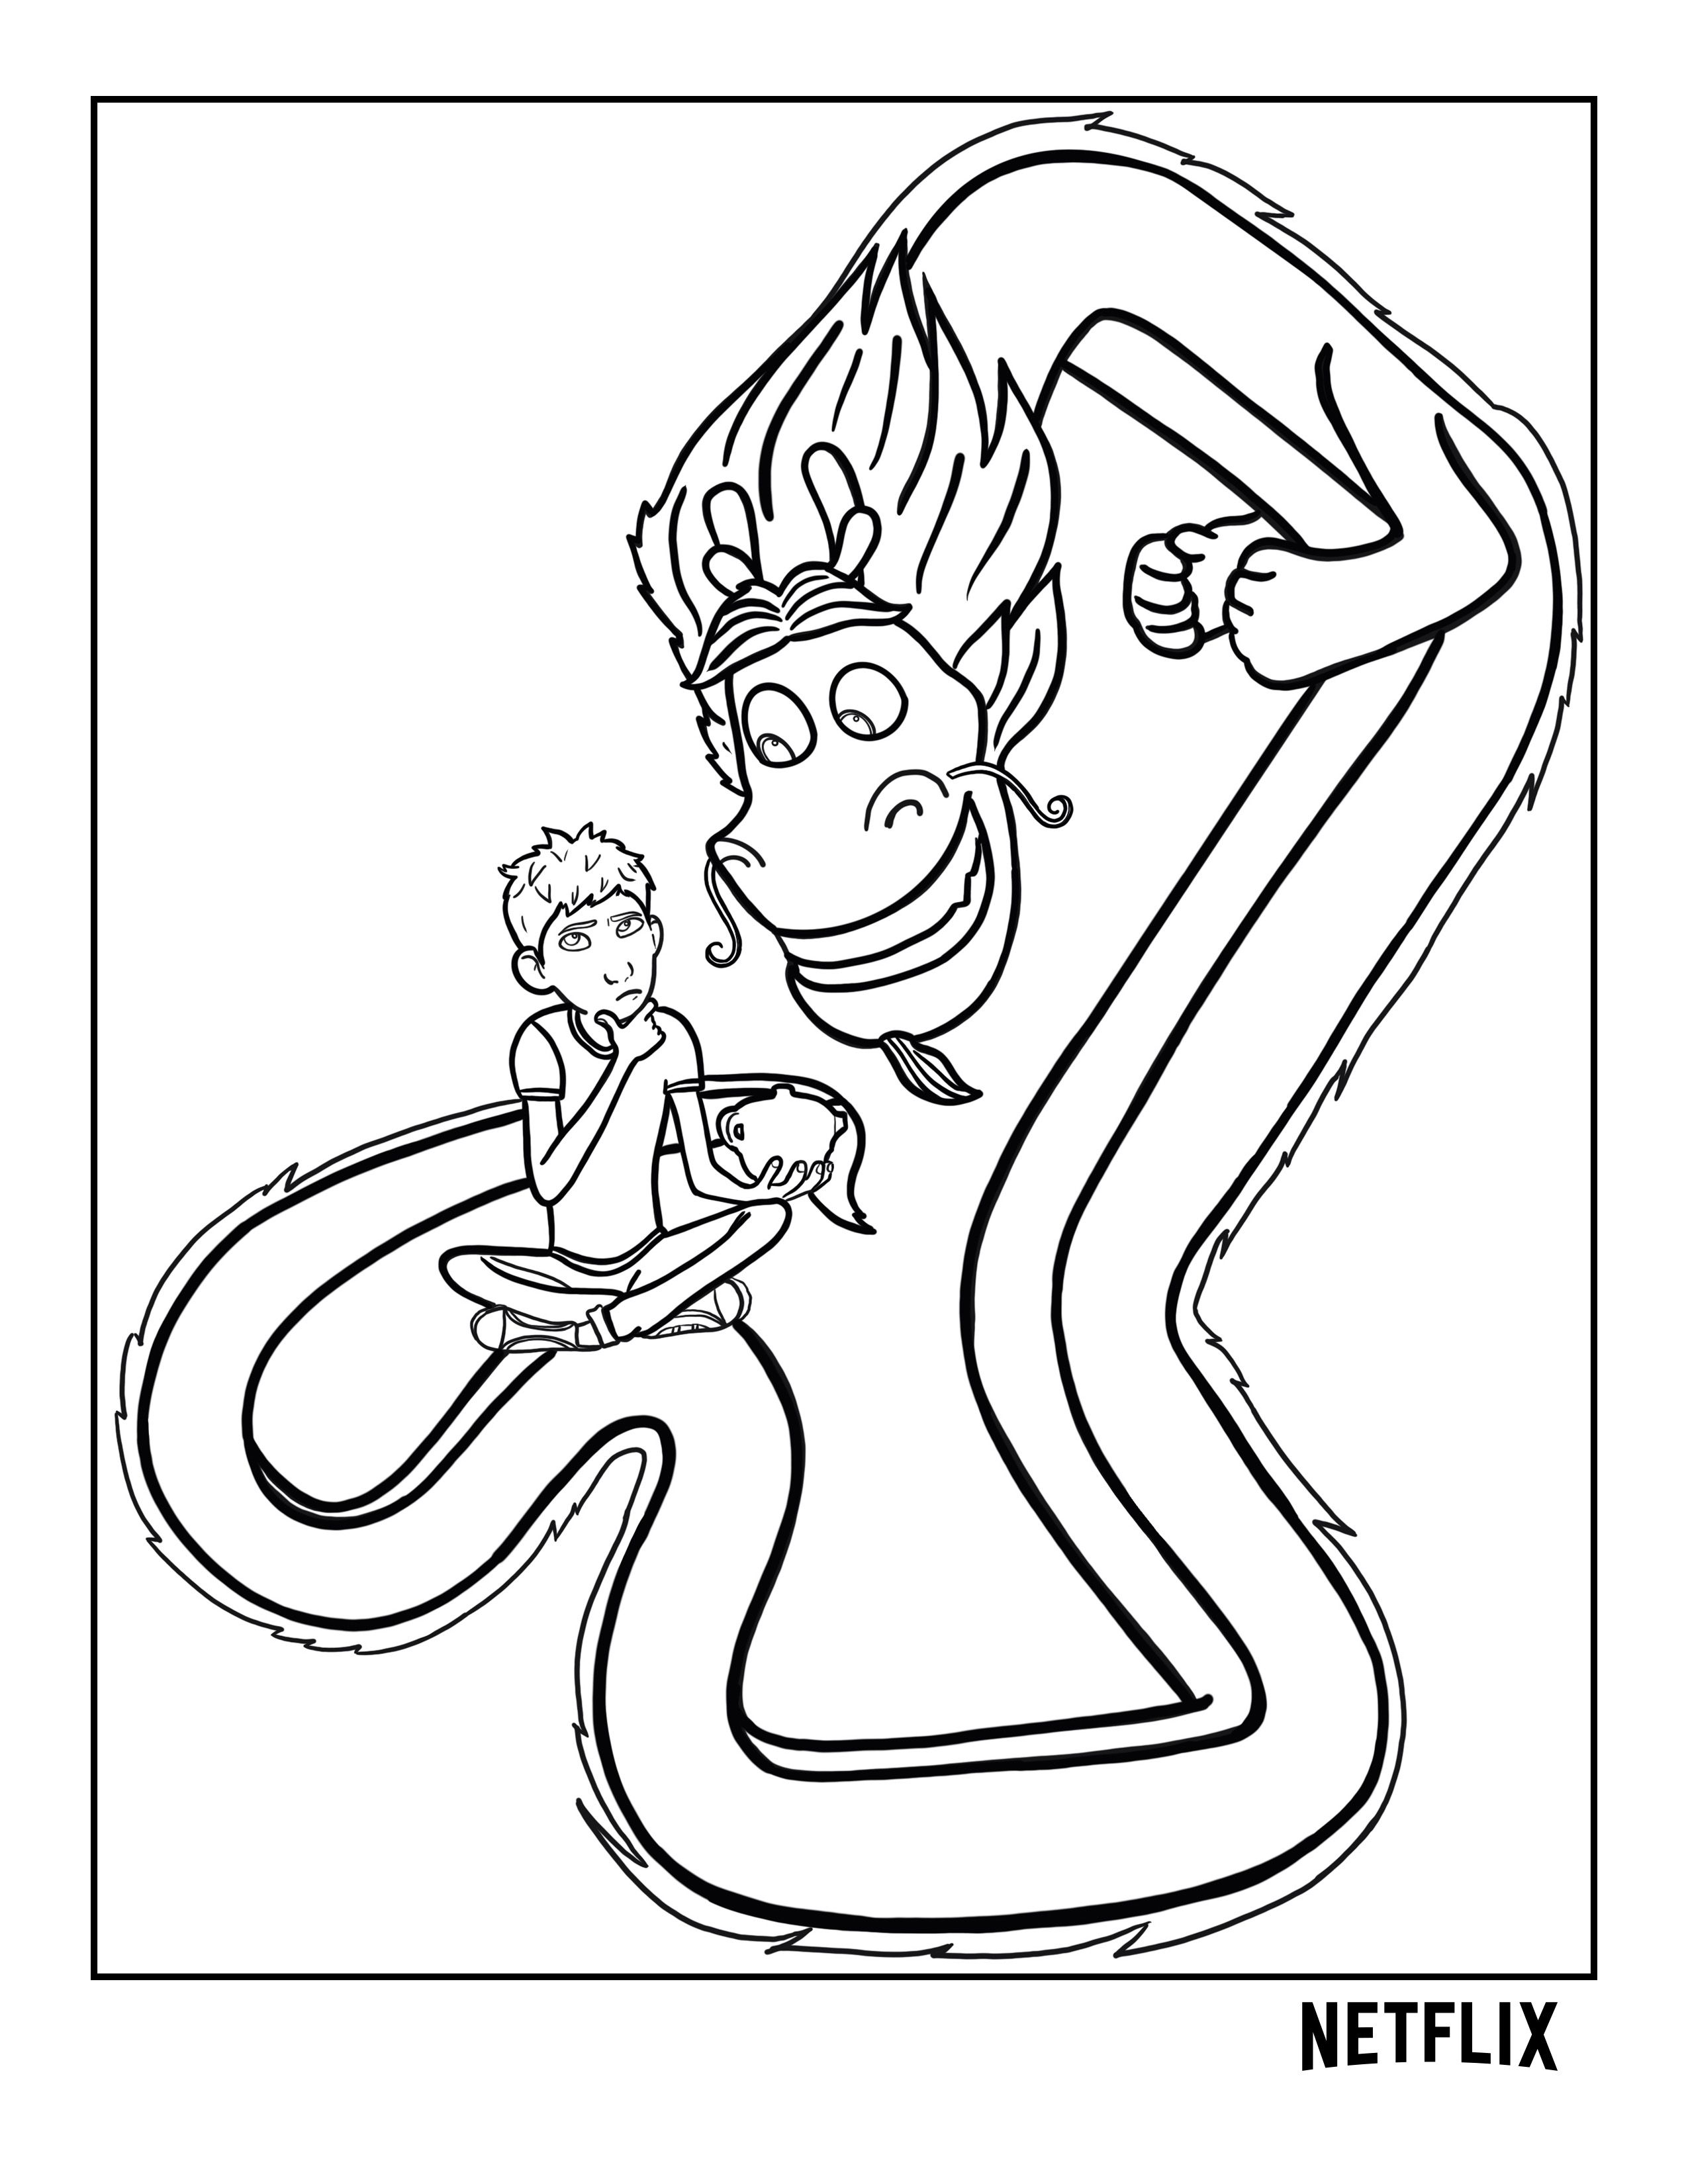 Wish Dragon Coloring Pages | Dragon coloring page, Coloring pages, Dragon